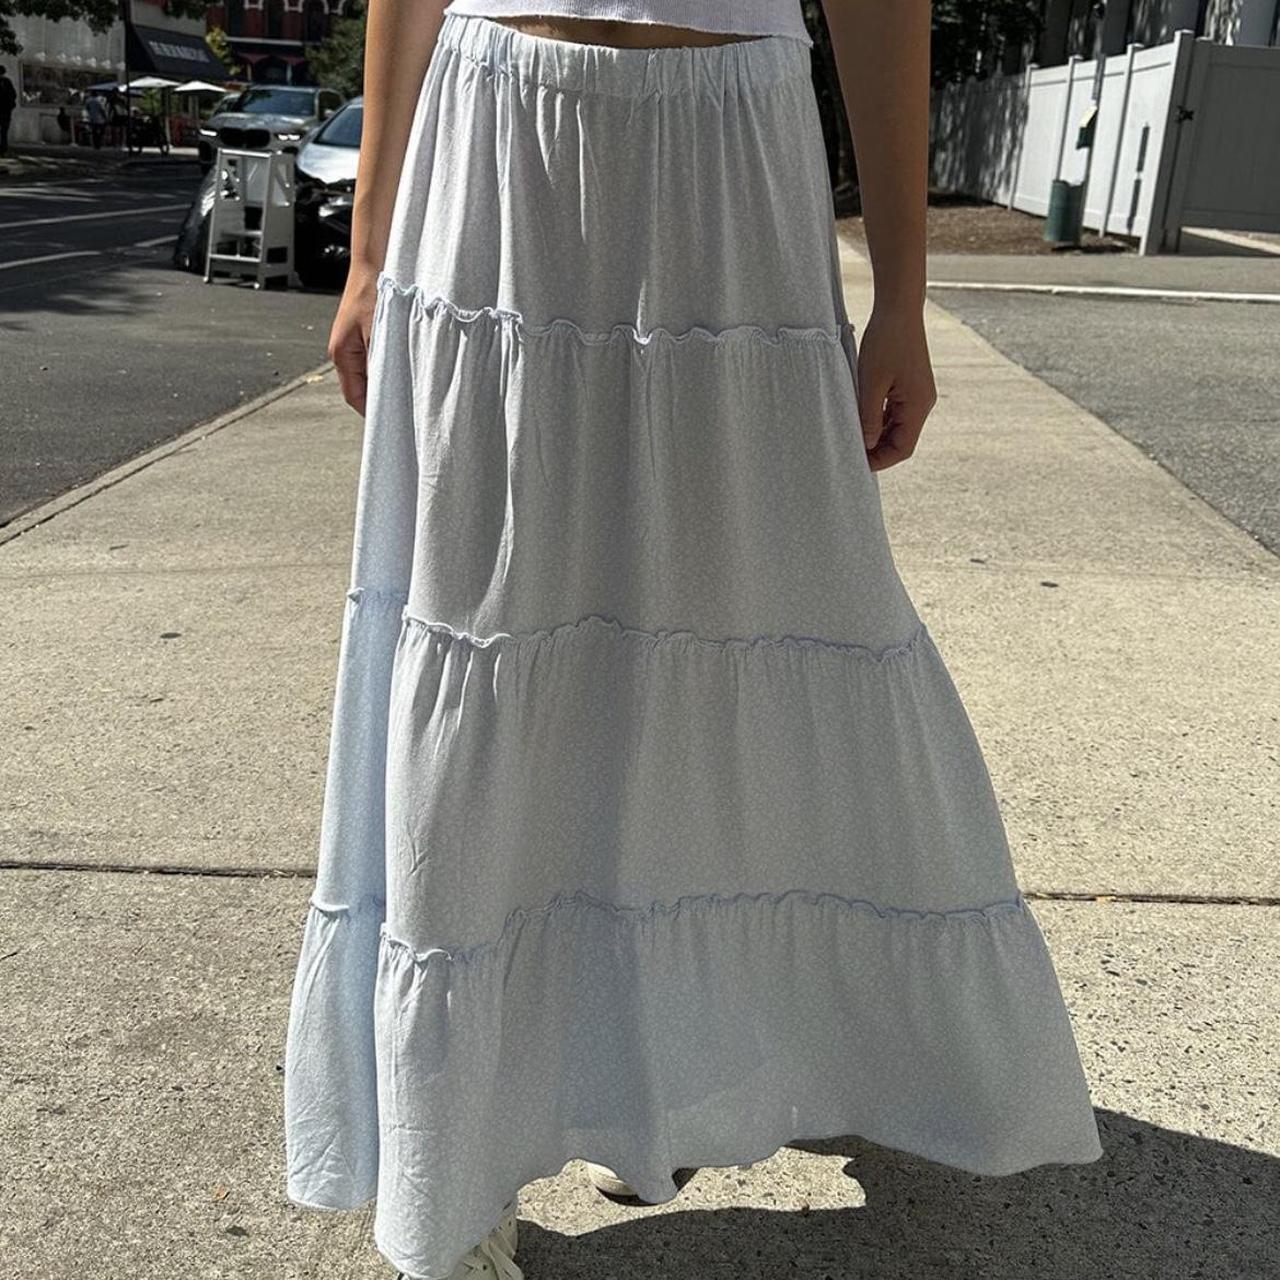 Brandy Melville Izzy Skirt • One size, would fit... - Depop